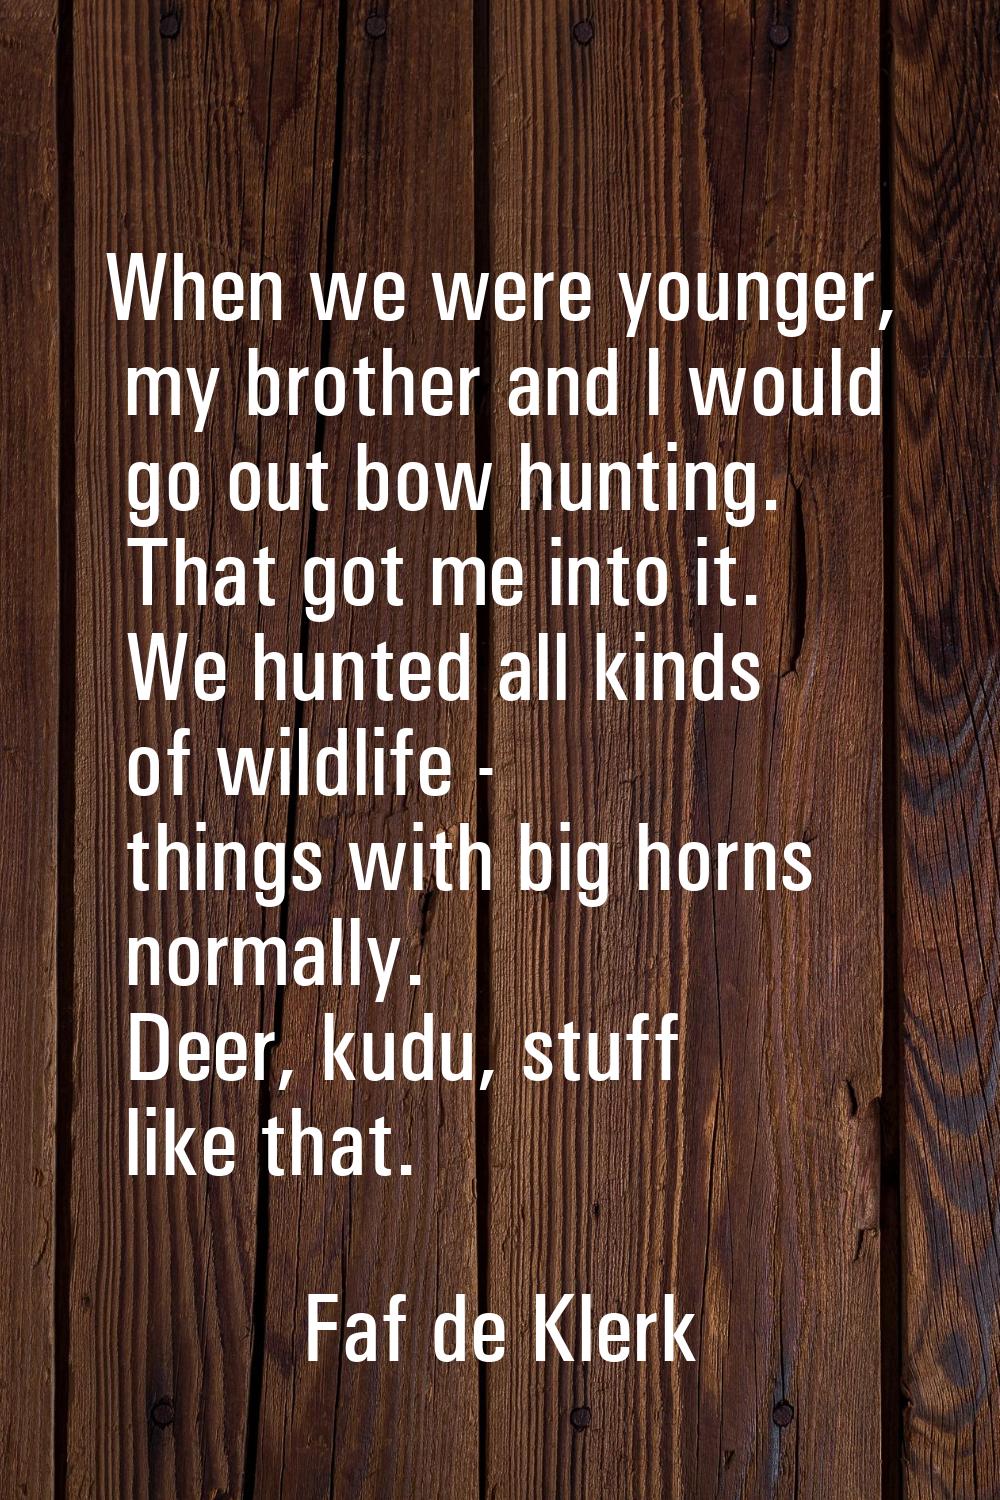 When we were younger, my brother and I would go out bow hunting. That got me into it. We hunted all